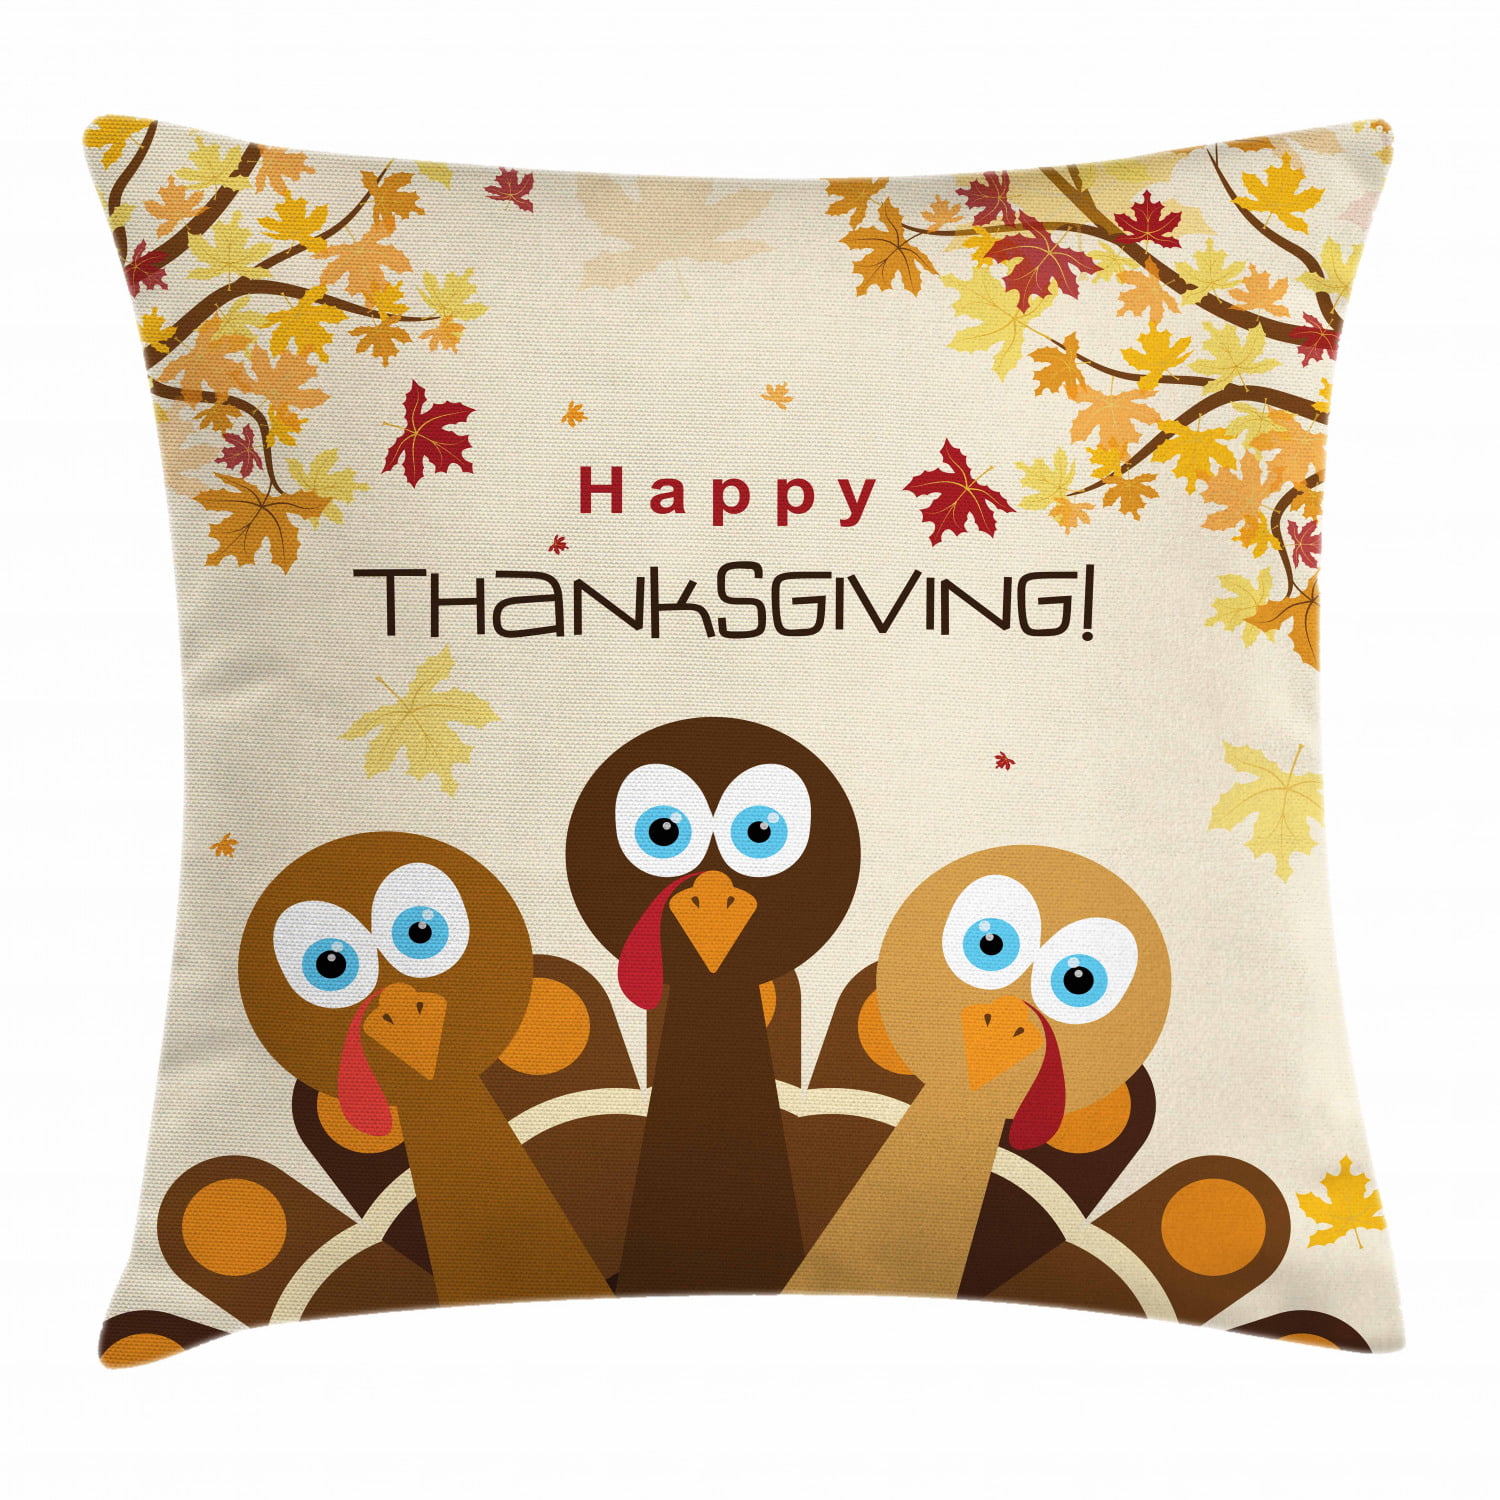 Mens & Womens Throw Pillow 18x18 Multicolor Happy Thanksgiving Thanksgiving Turkey Outfit Gift Idea 